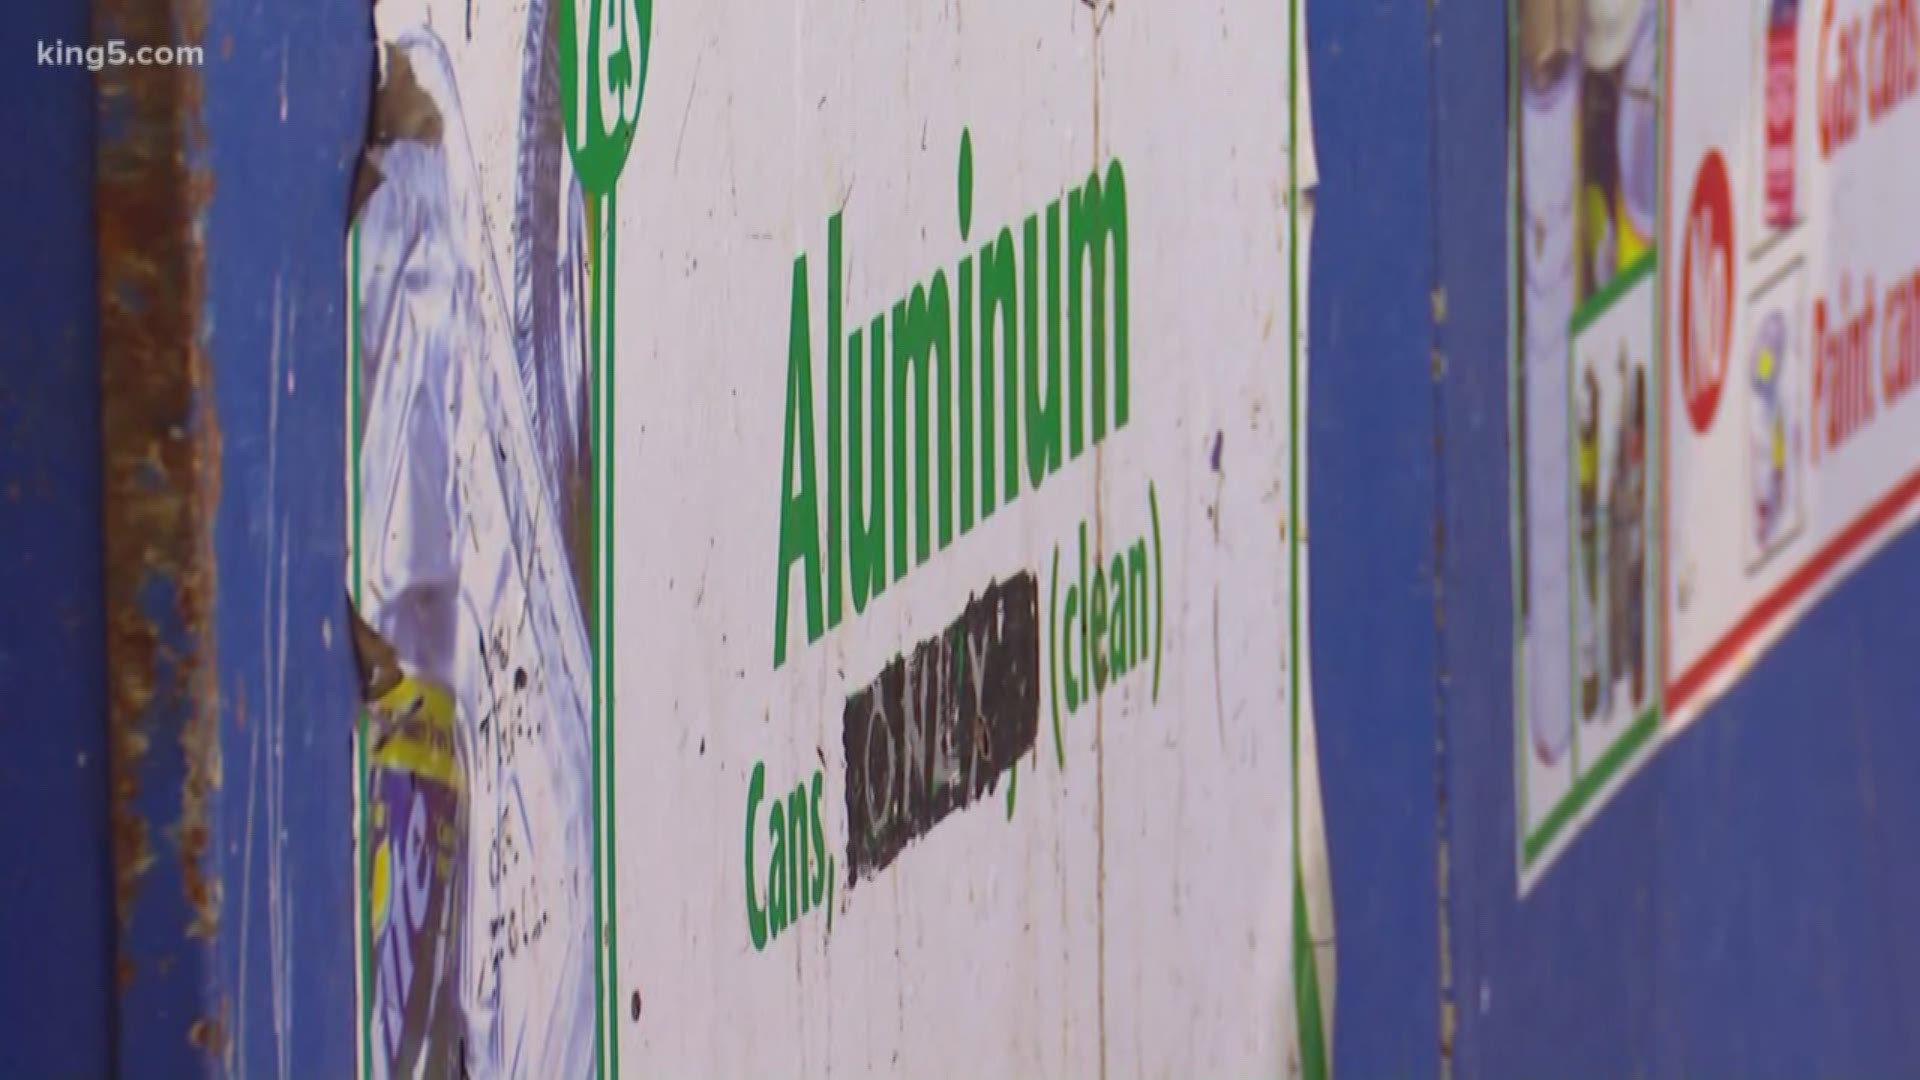 Tacoma city leaders released their recommendation for how they think the city should cover its increasing recycling costs. KING 5's Kalie Greenberg explains.